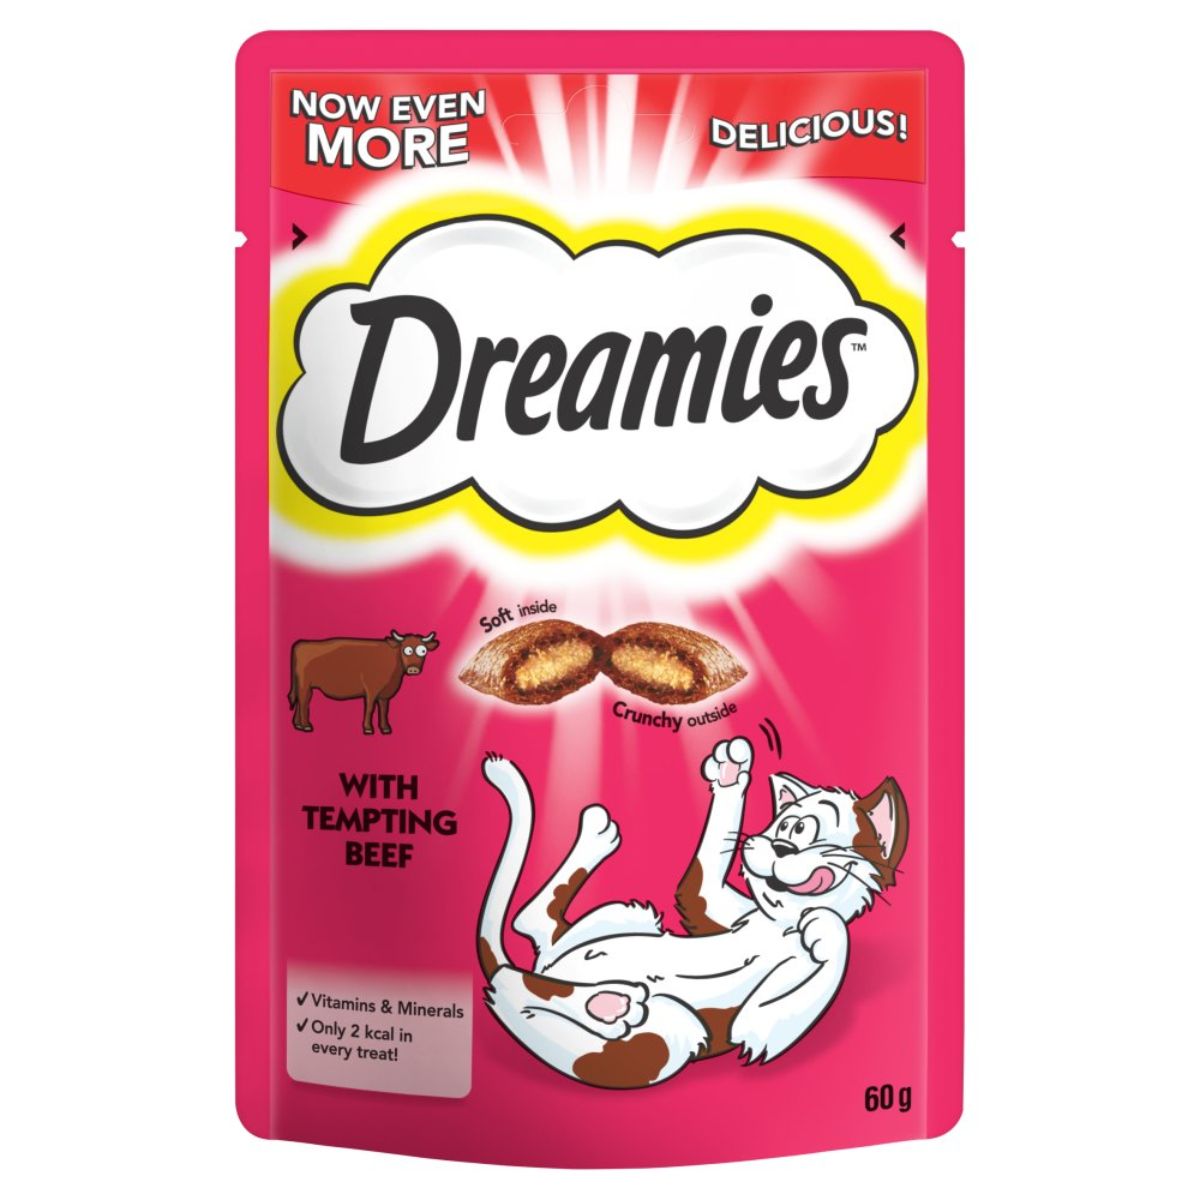 Dreamies - with tempting Beef Treats - 60g cat treats.